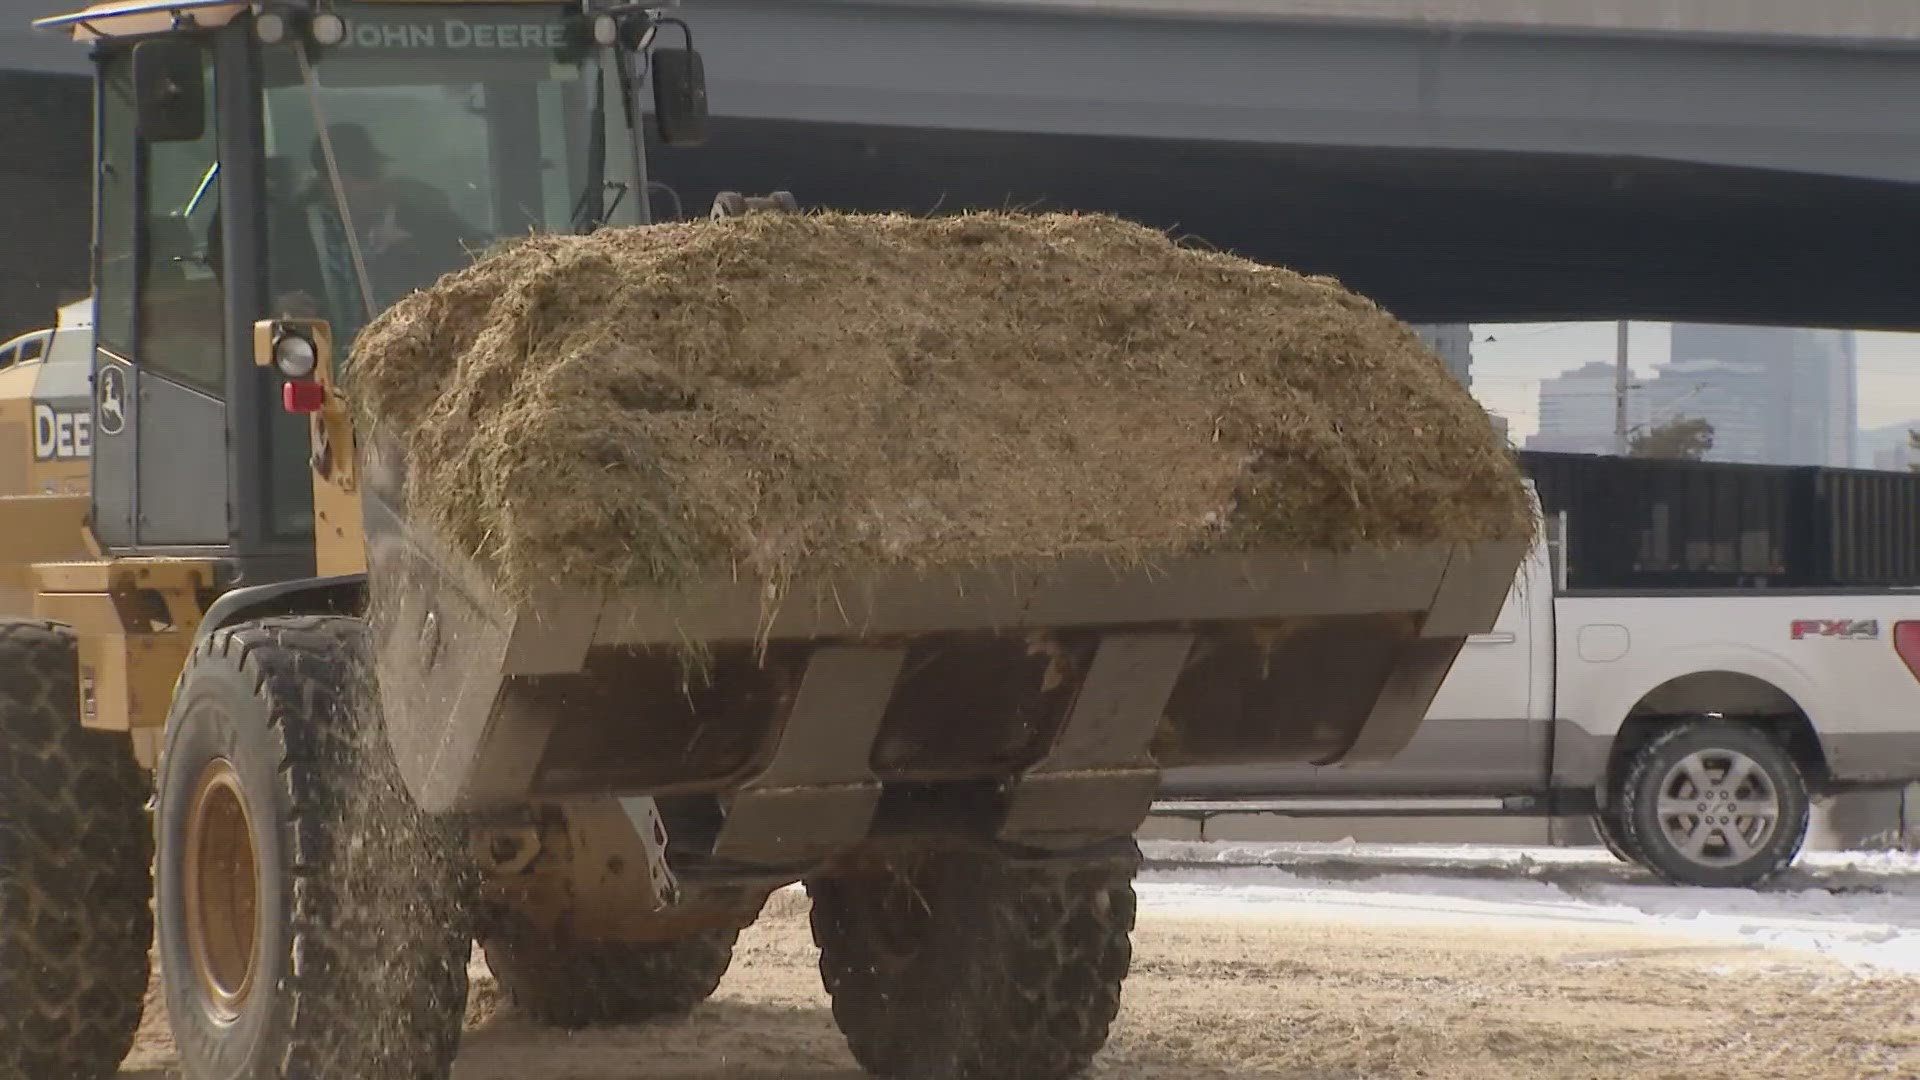 About 85 semi truck loads of manure are piled up every year from the thousands of animals that take part in the event.  But don't worry, it doesn't go to waste!